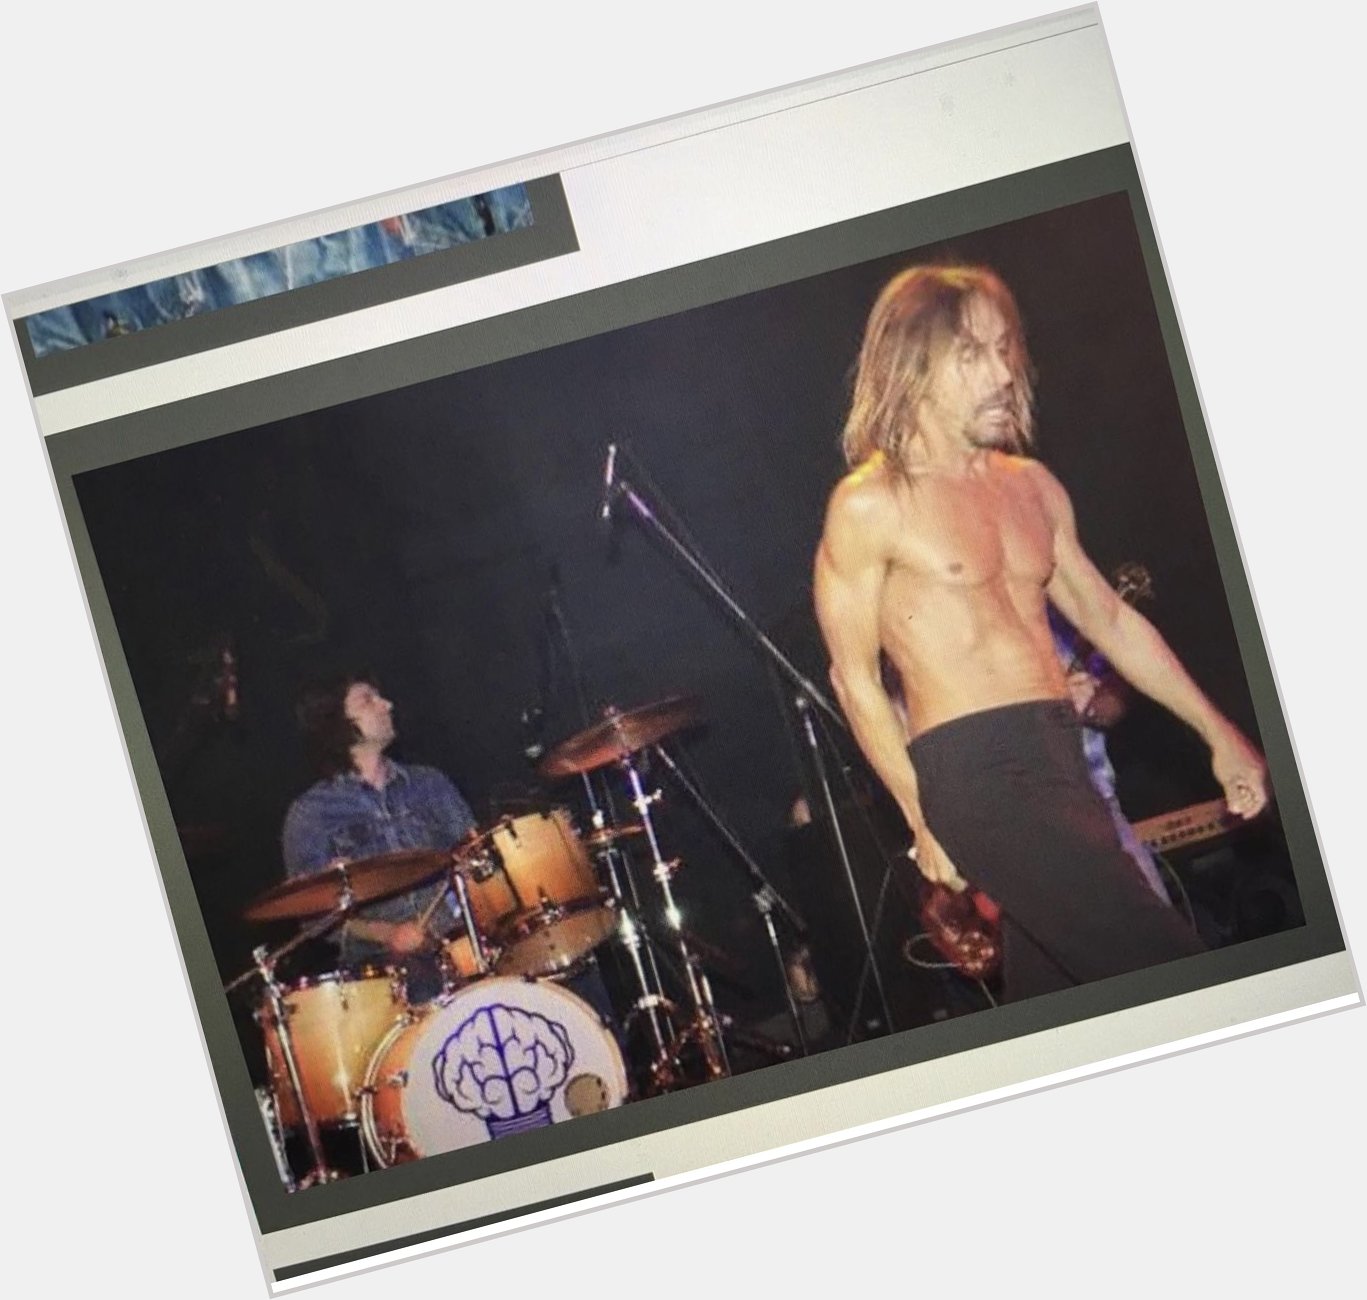 Happy bday to the legend that is Iggy Pop. Getting to drum for him was def a highlight of my musical journey.  